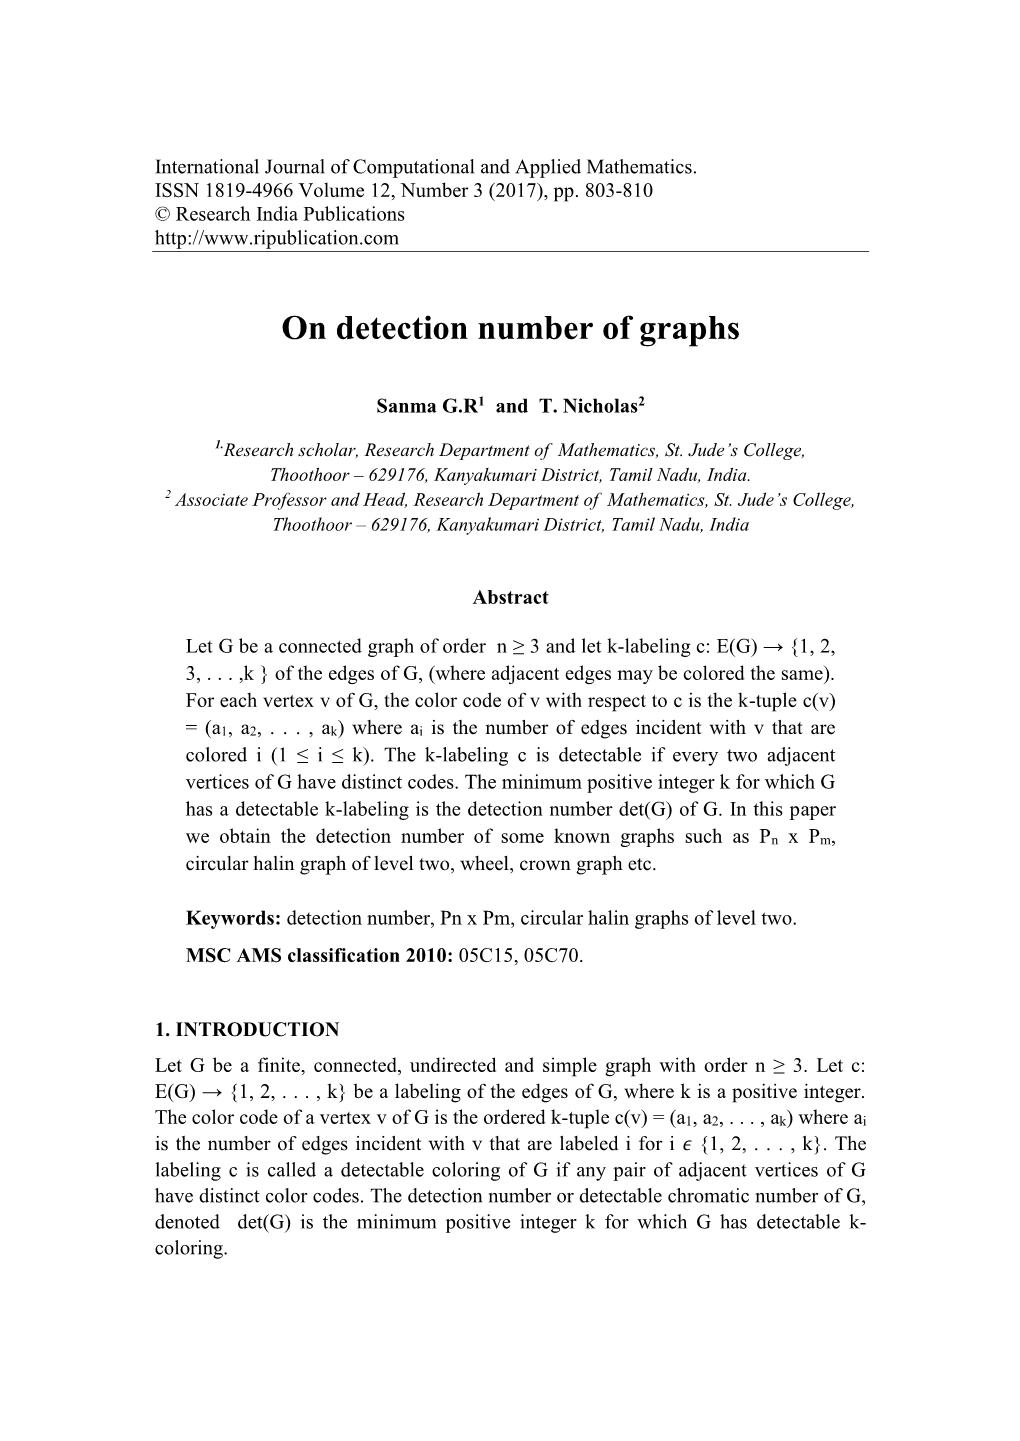 On Detection Number of Graphs